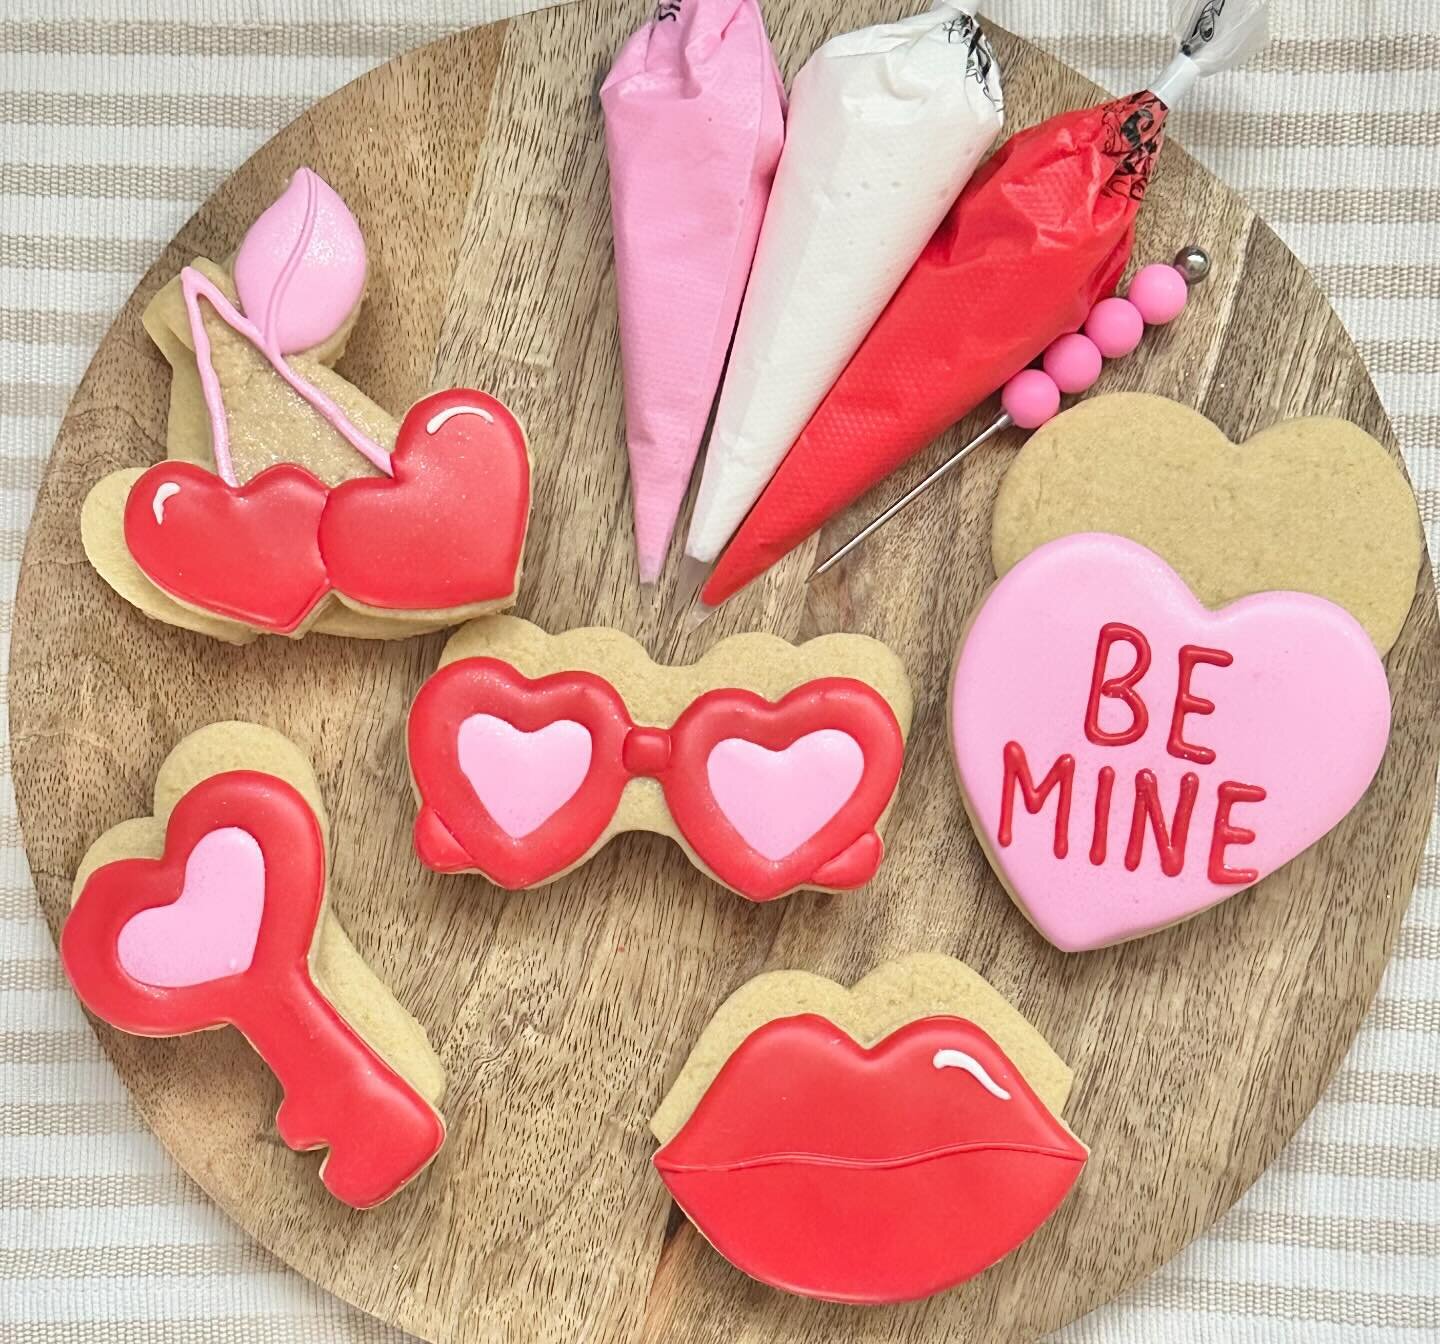 📣📣📣 Grab your girlfriends and sign up for our Galentine&rsquo;s Cookie Decorating class by @sugarsweetsbyjackie in @thebyhclassroom 🩷💖🥰🍷
Saturday, February 10th
10-12
Just click the Classroom tab on our website for all the details!!! 
#galenti